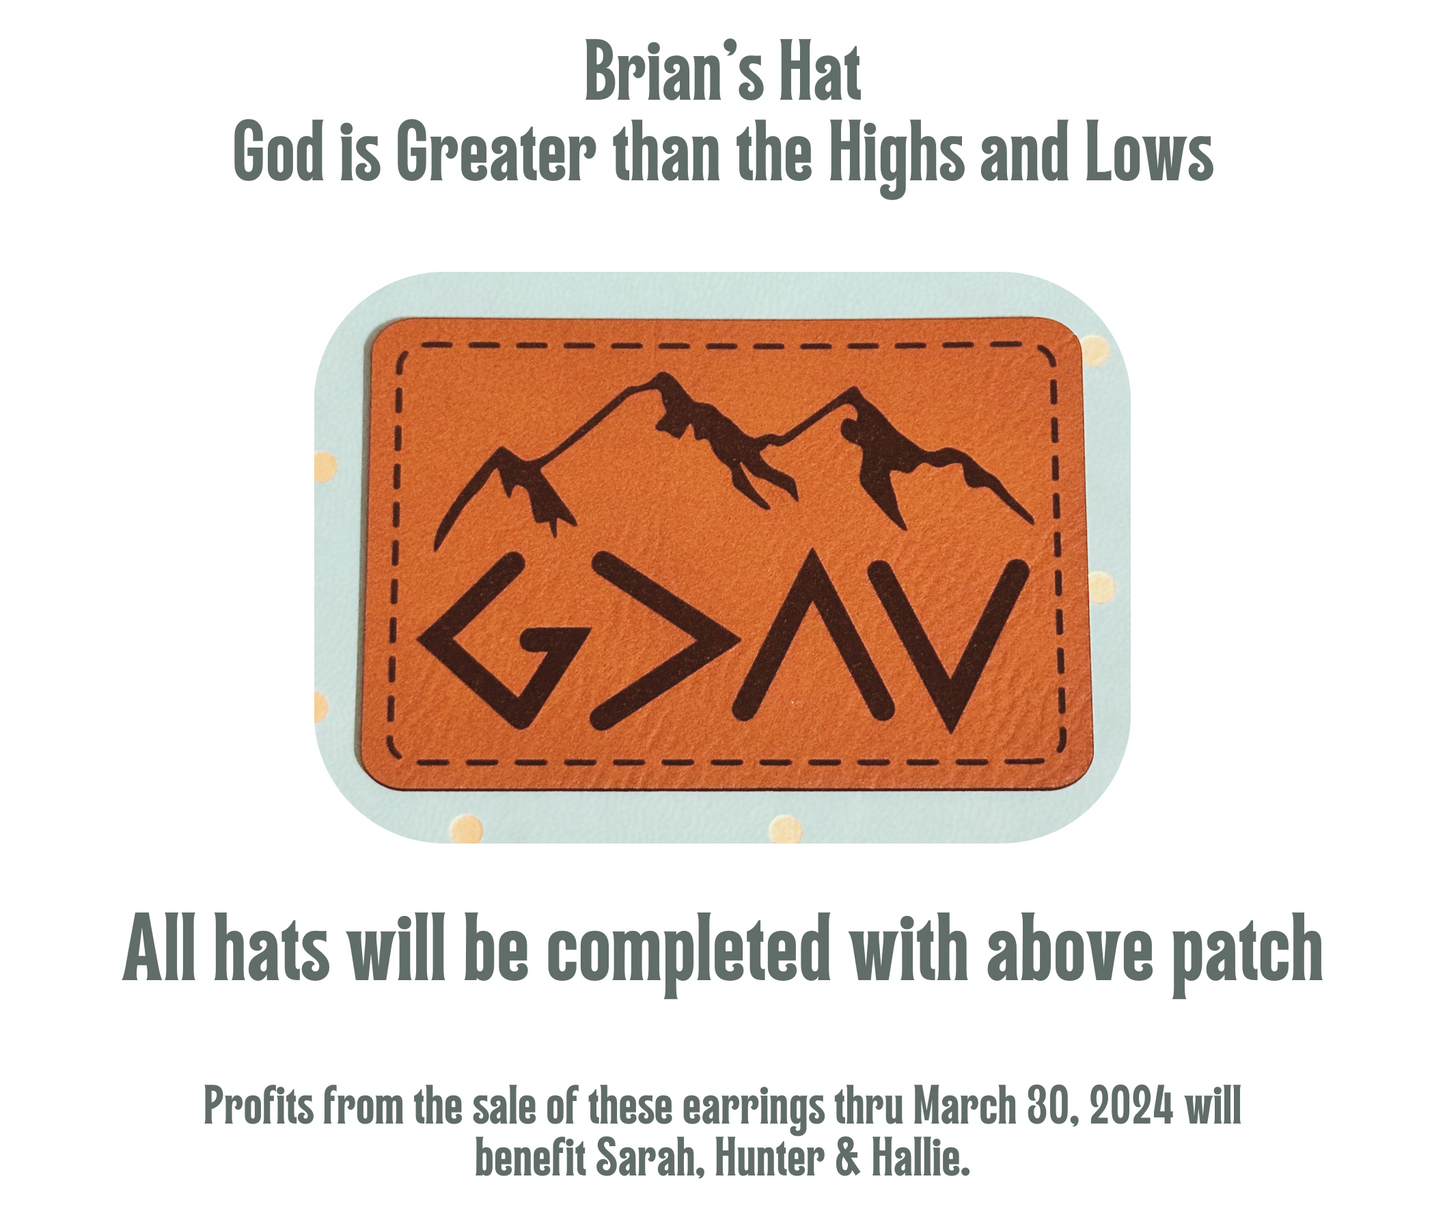 "Brian's Hat" God is greater than the highs and lows Richardson 112